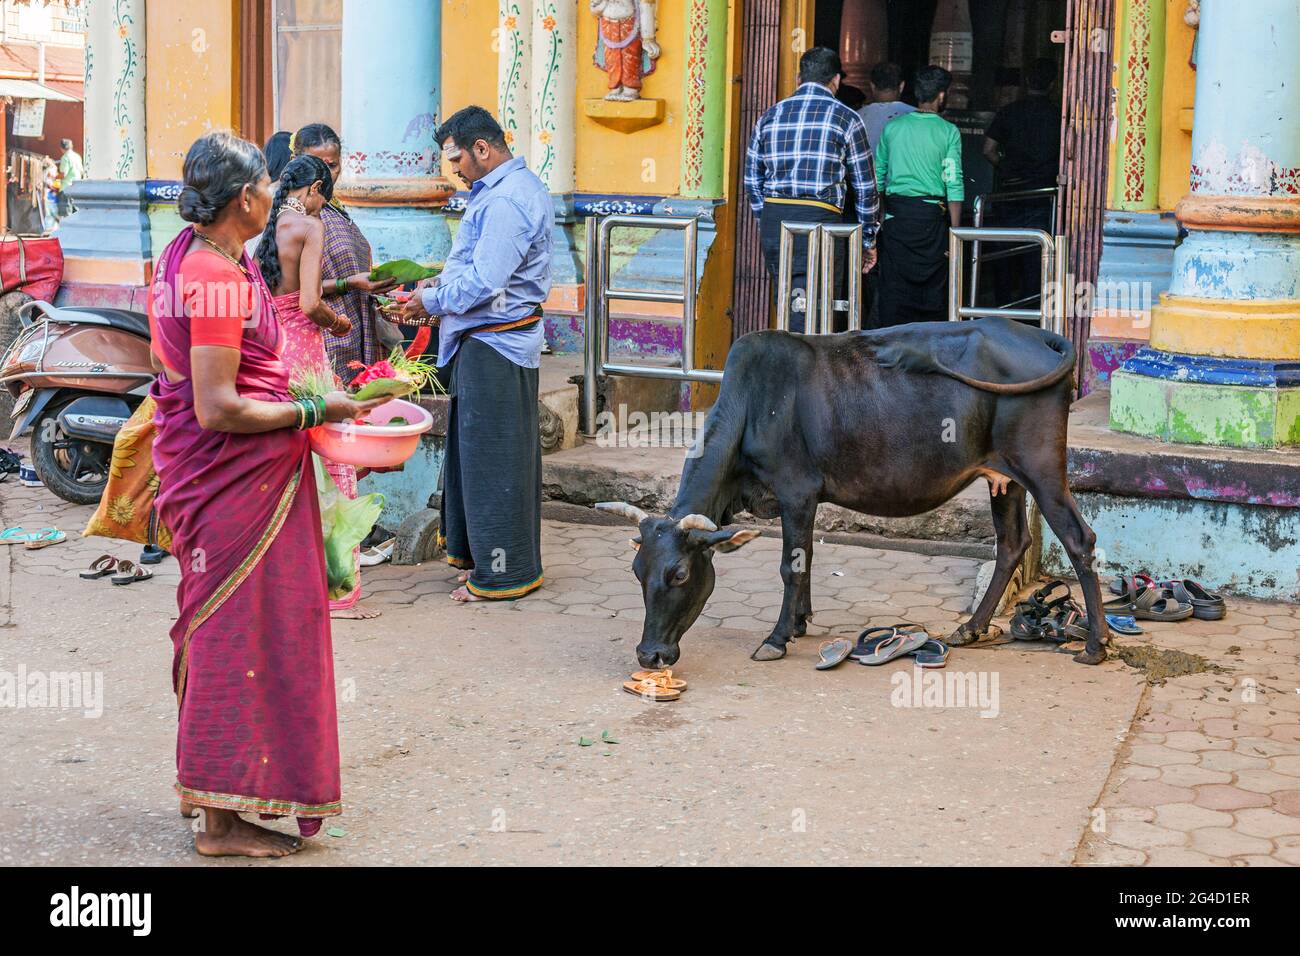 Indian female offers puja offering to worshippers as sacred cow sniffs flip flops, Shree Mahaganapati Temple, Gokarna, Karnataka, India Stock Photo